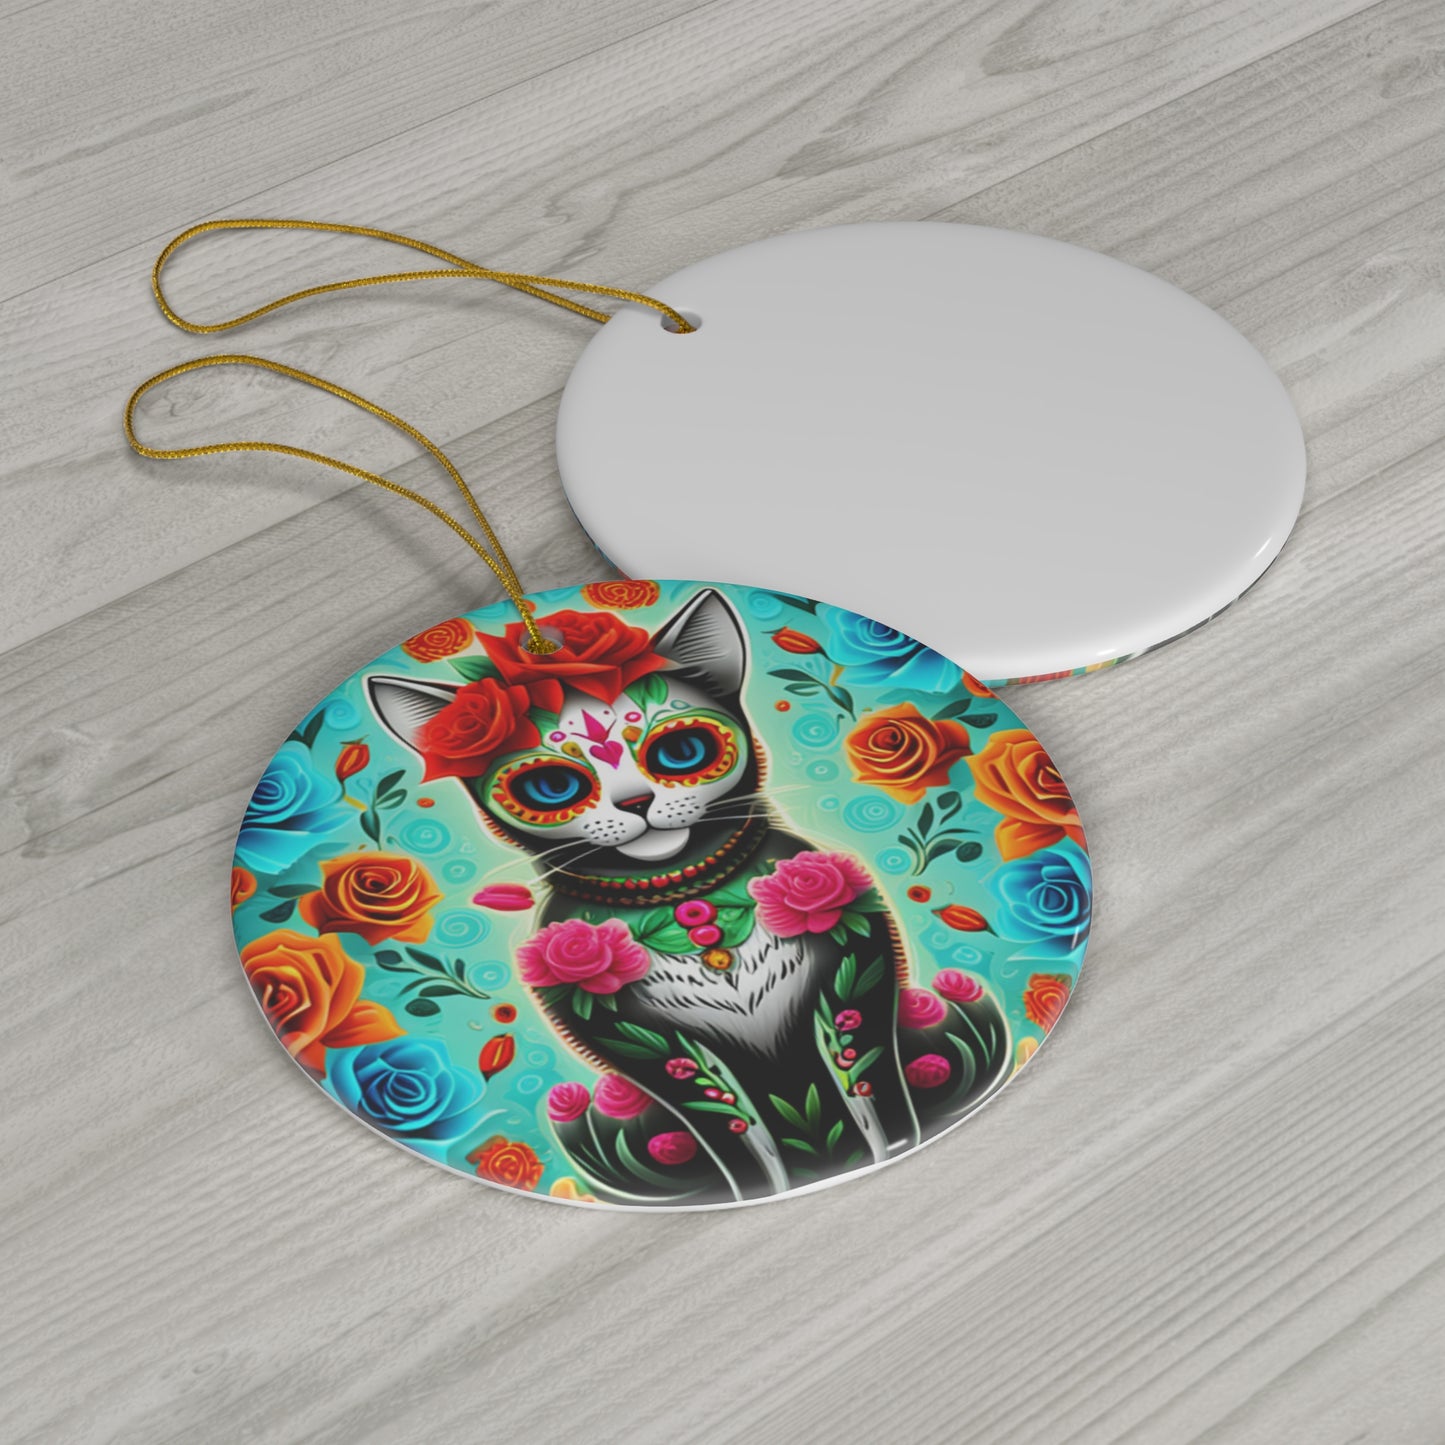 Day of the Dead Black Cat Red Roses Mexican Folklore Hispanic Ceramic Ornament